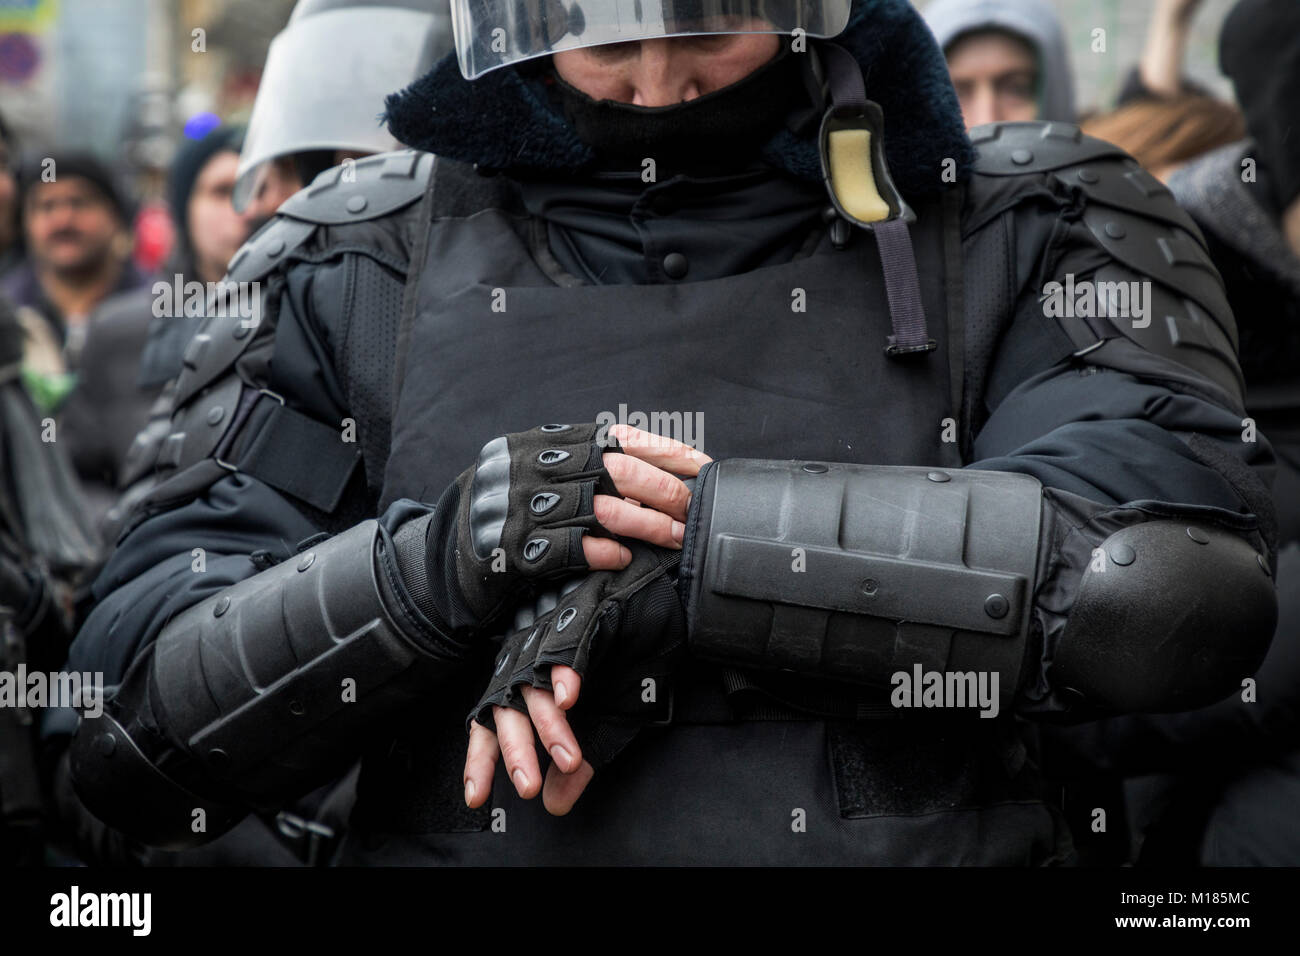 Moscow, Russia. 28th Jan, 2018. A policeman looks at his watch during an opposition rally calling for a boycott of March 18 presidential elections, in Moscow, Russia Credit: Nikolay Vinokurov/Alamy Live News Stock Photo